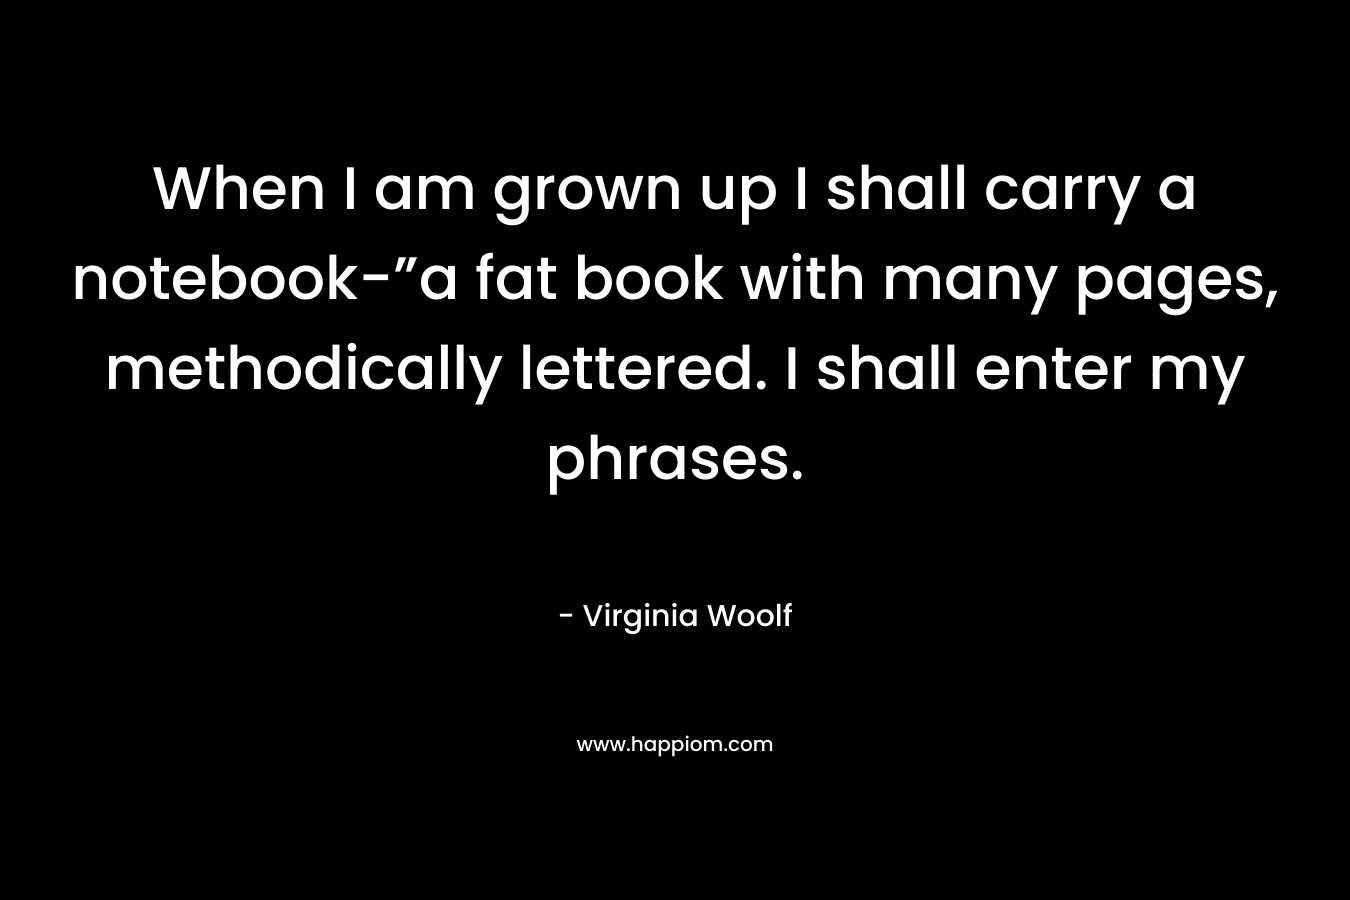 When I am grown up I shall carry a notebook-”a fat book with many pages, methodically lettered. I shall enter my phrases.